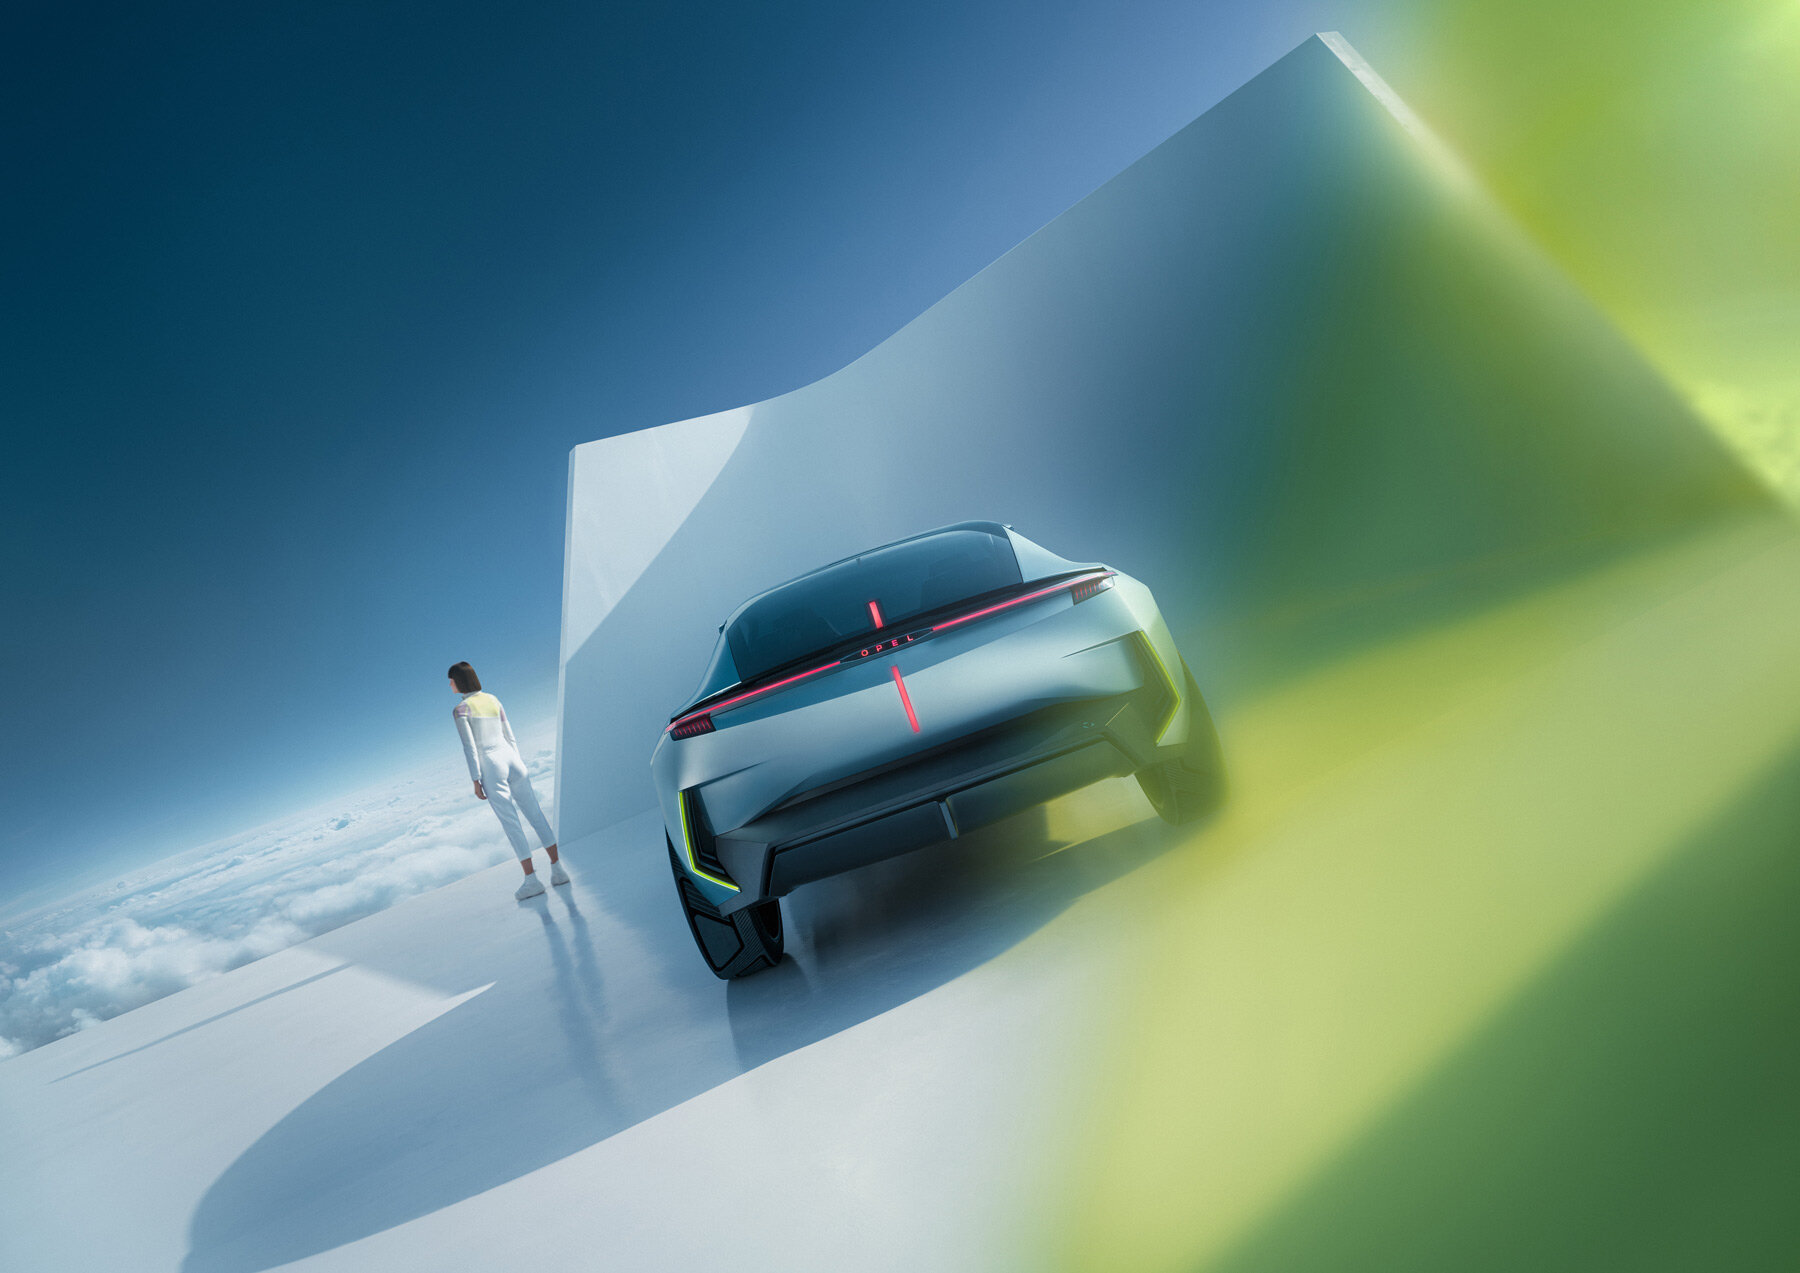 opel introduces streamlined electric car concept with foldable